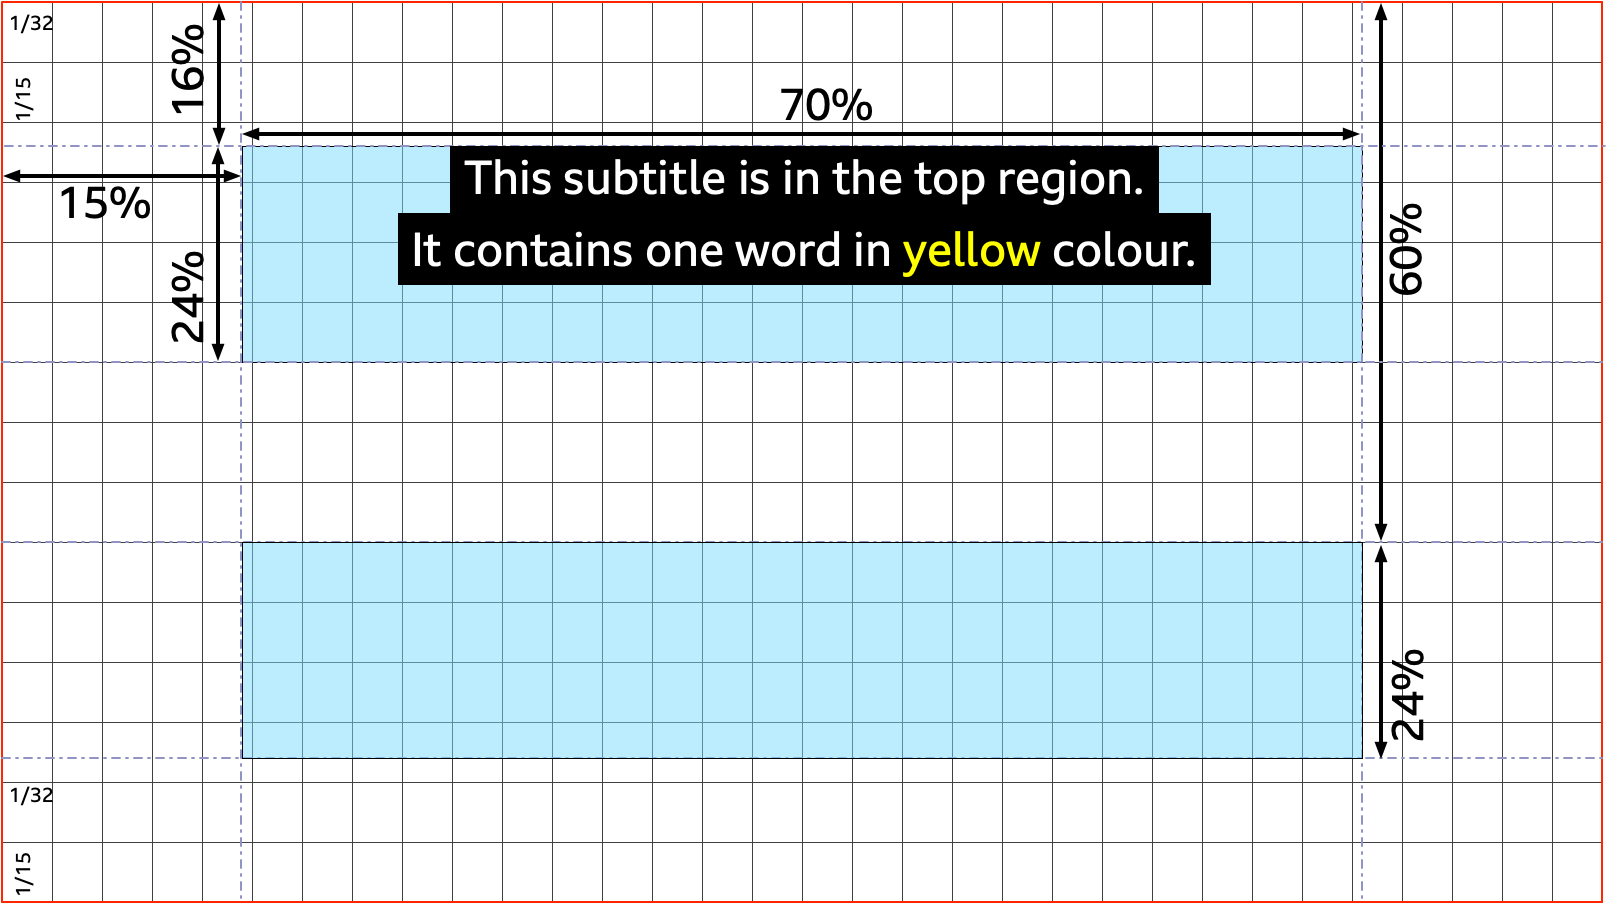 Image showing rendering of example, with text 'This subtitle is in the top region' etc in upper region of image, on a 32x15 cell grid. The word 'yellow' is coloured yellow; the other words are white.